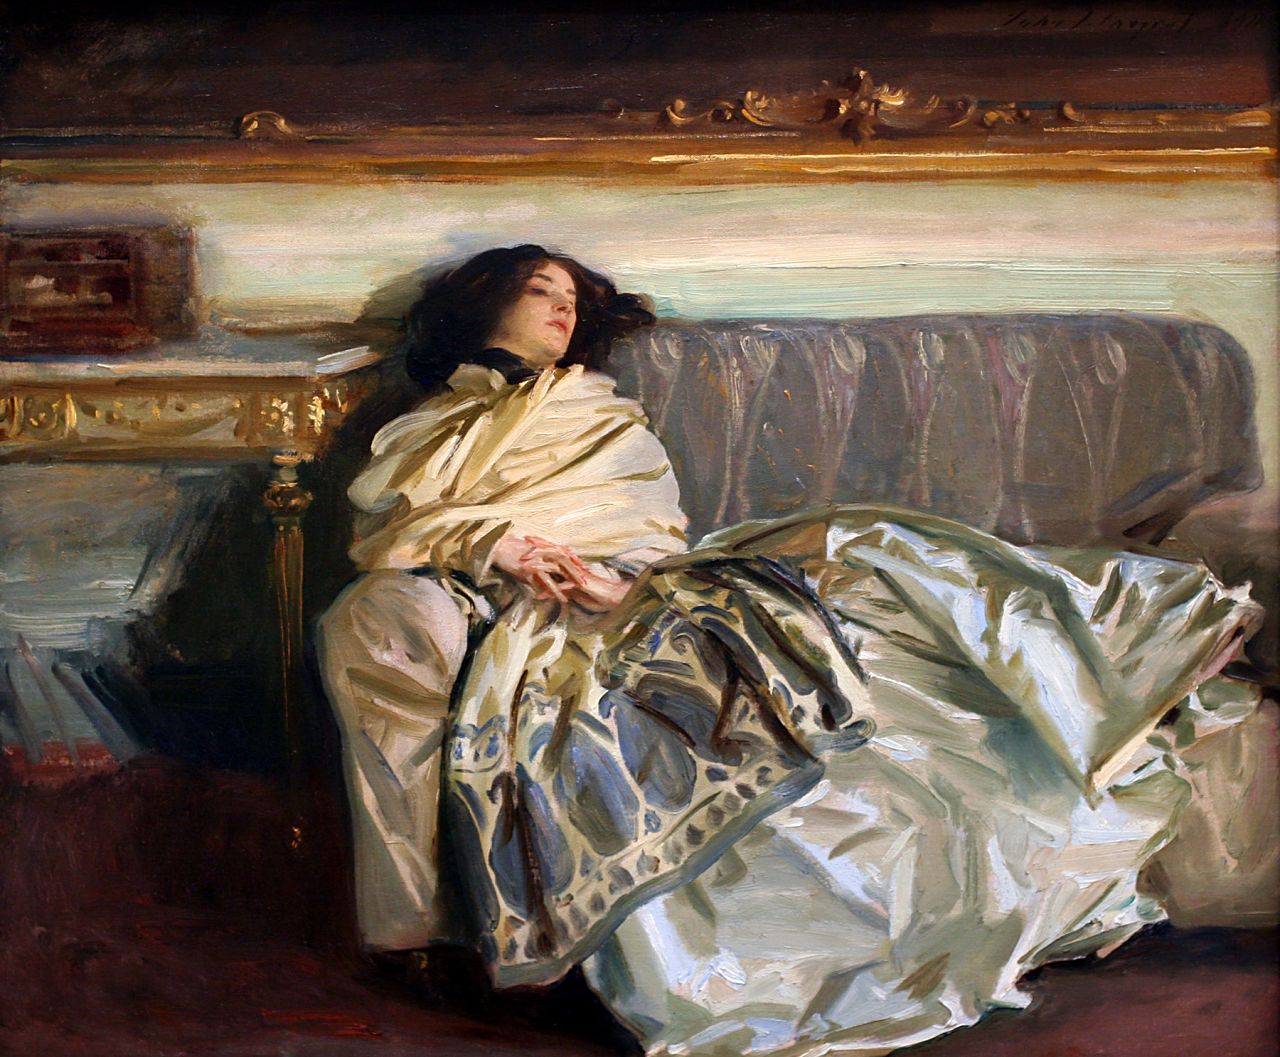 Nonchaloir (Repose) by John Singer Sargent - 1911 - 64 x 76 cm National Gallery of Art